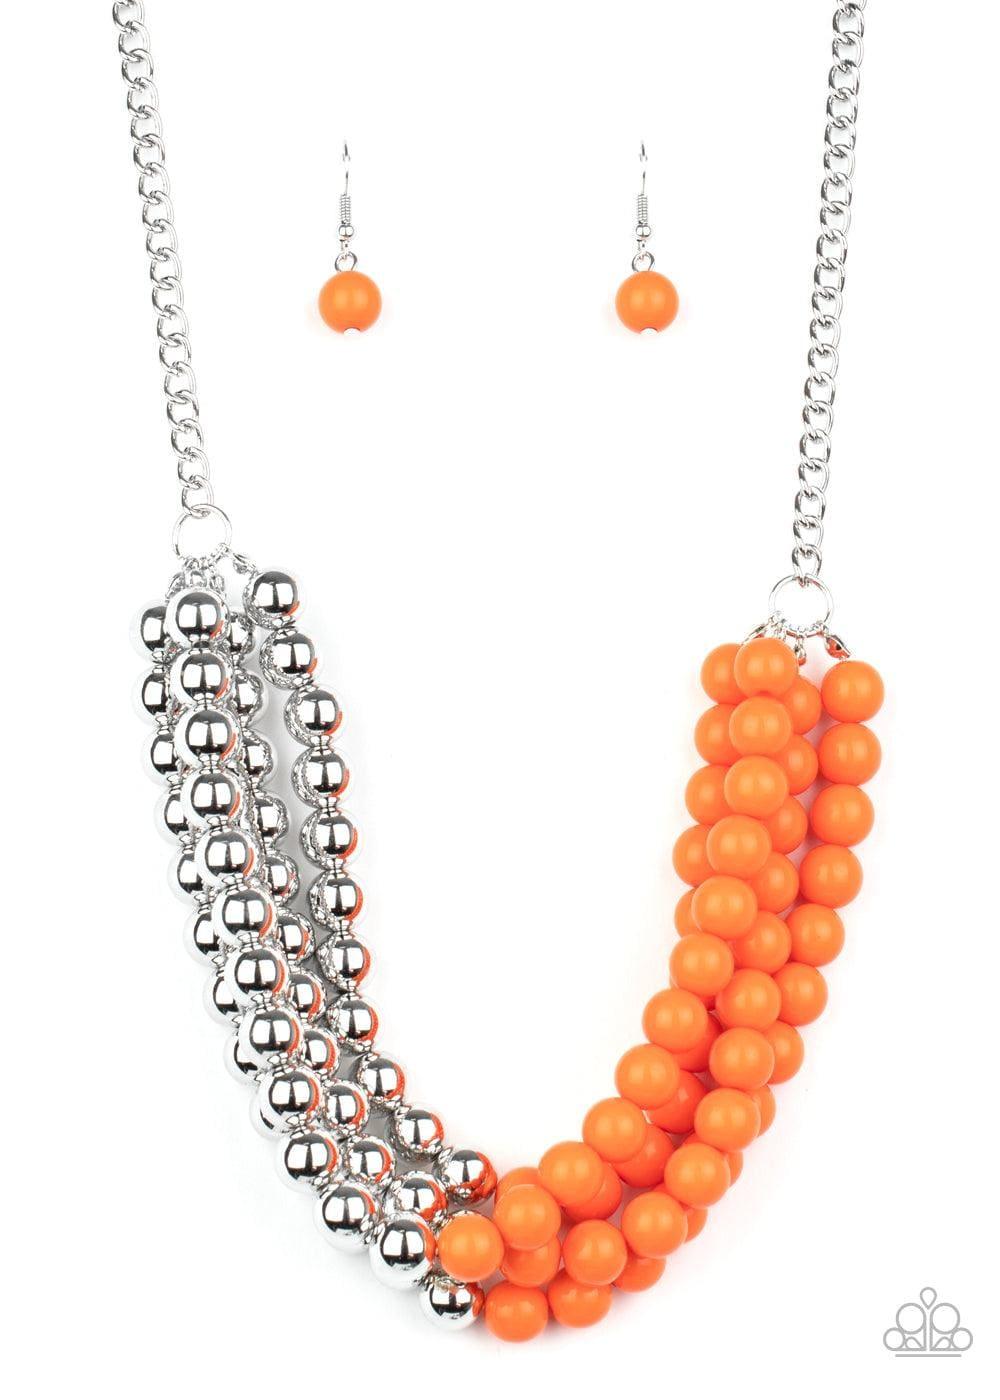 Paparazzi Accessories - Layer After Layer - Orange Necklace - Bling by JessieK